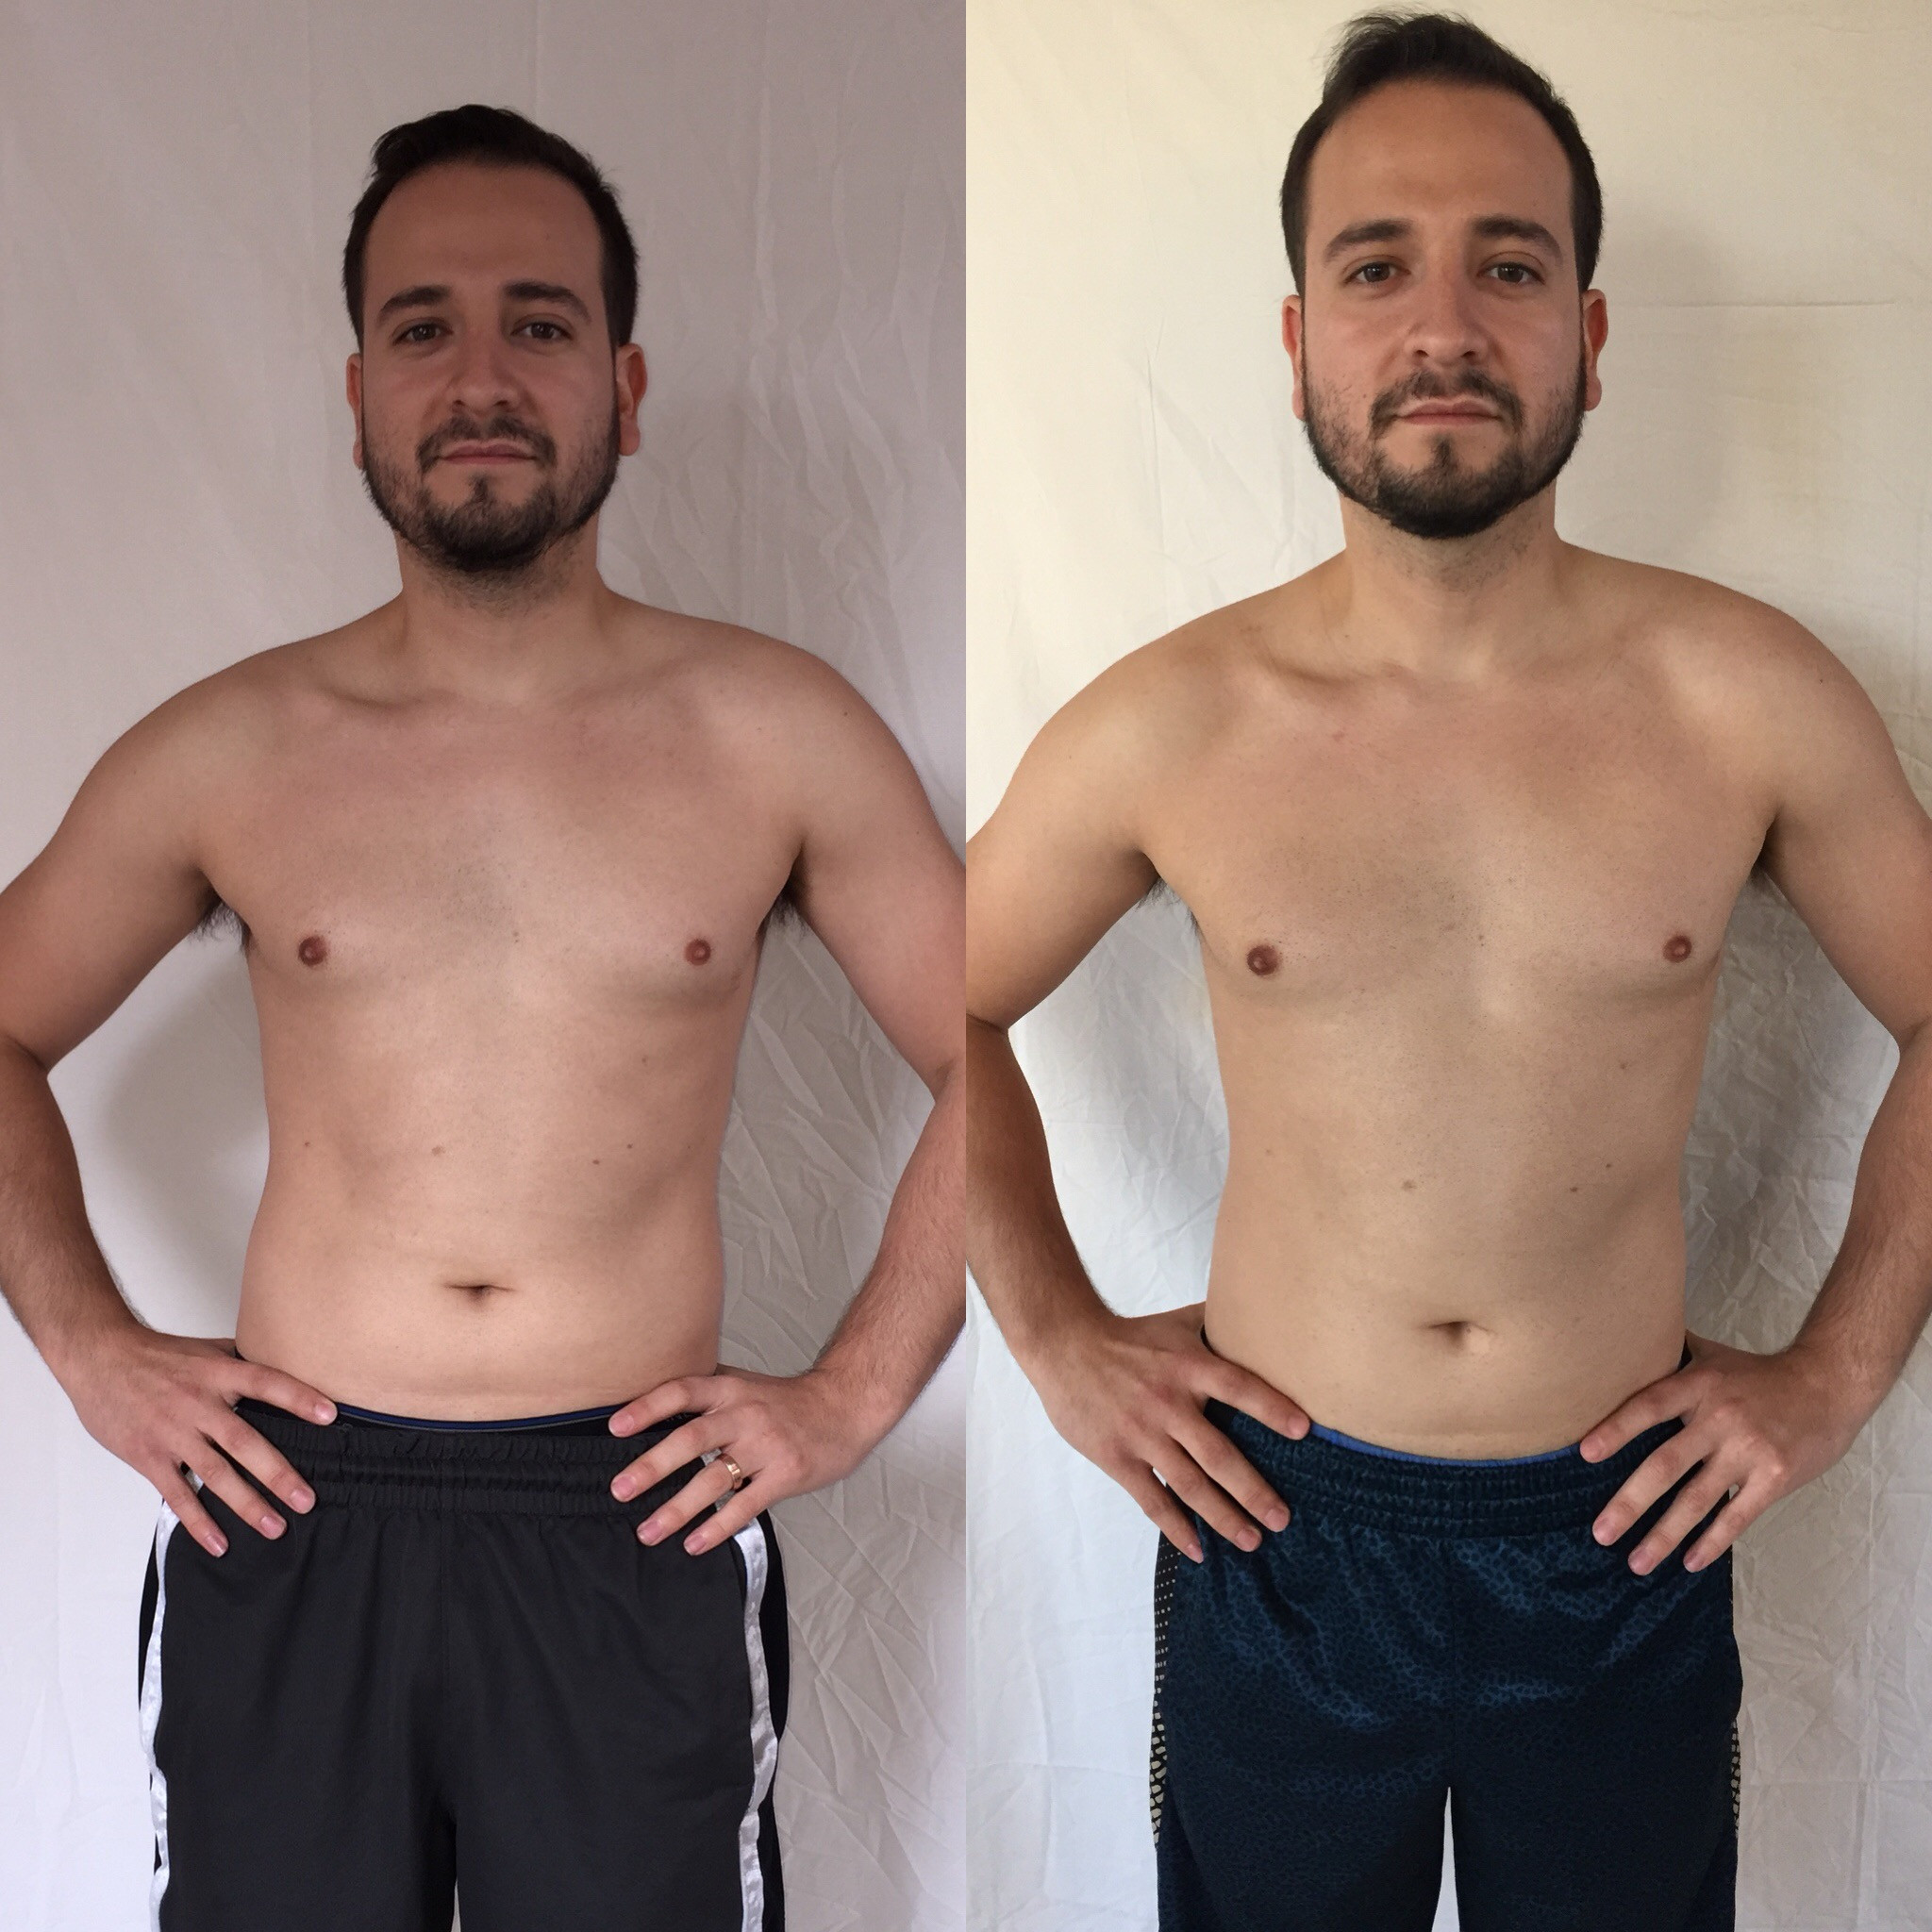 Keto Diet Before And After 2 Weeks
 I lost 6 lbs in 2 weeks on the keto t CarbstoKeto